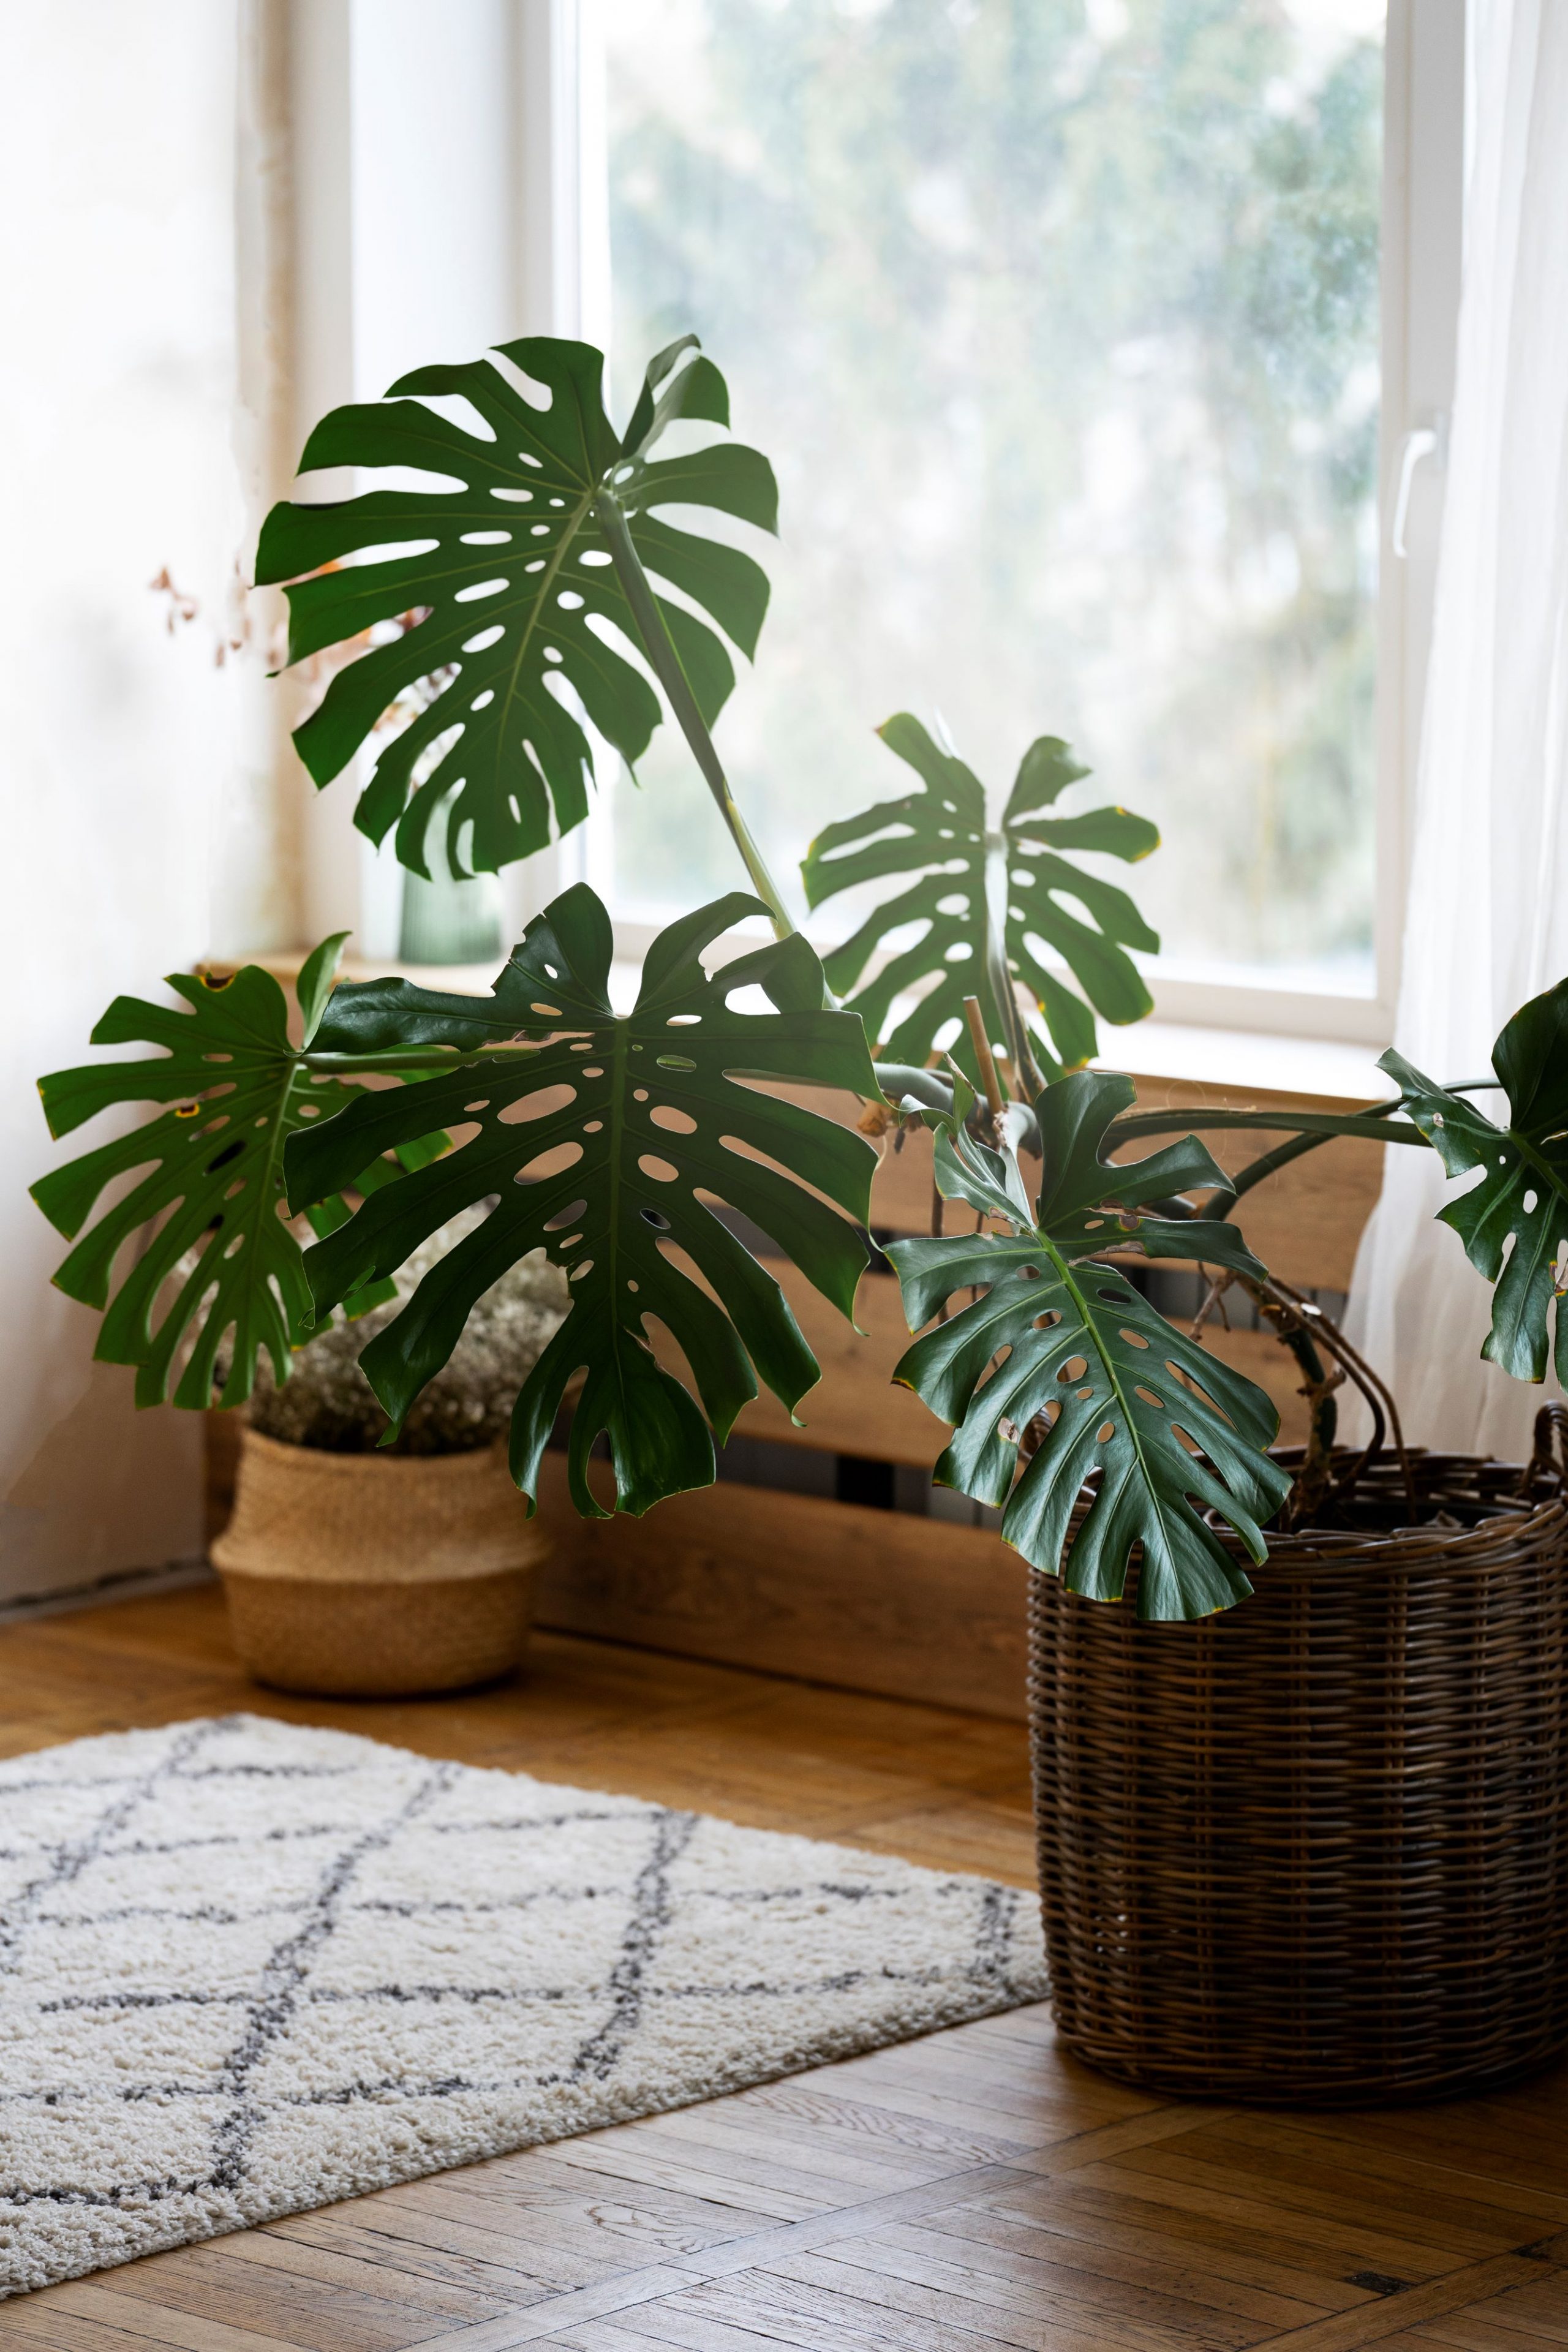 BRING NATURE INTO YOUR HOME - HOW TO EMBRACE WINTER GREENERY